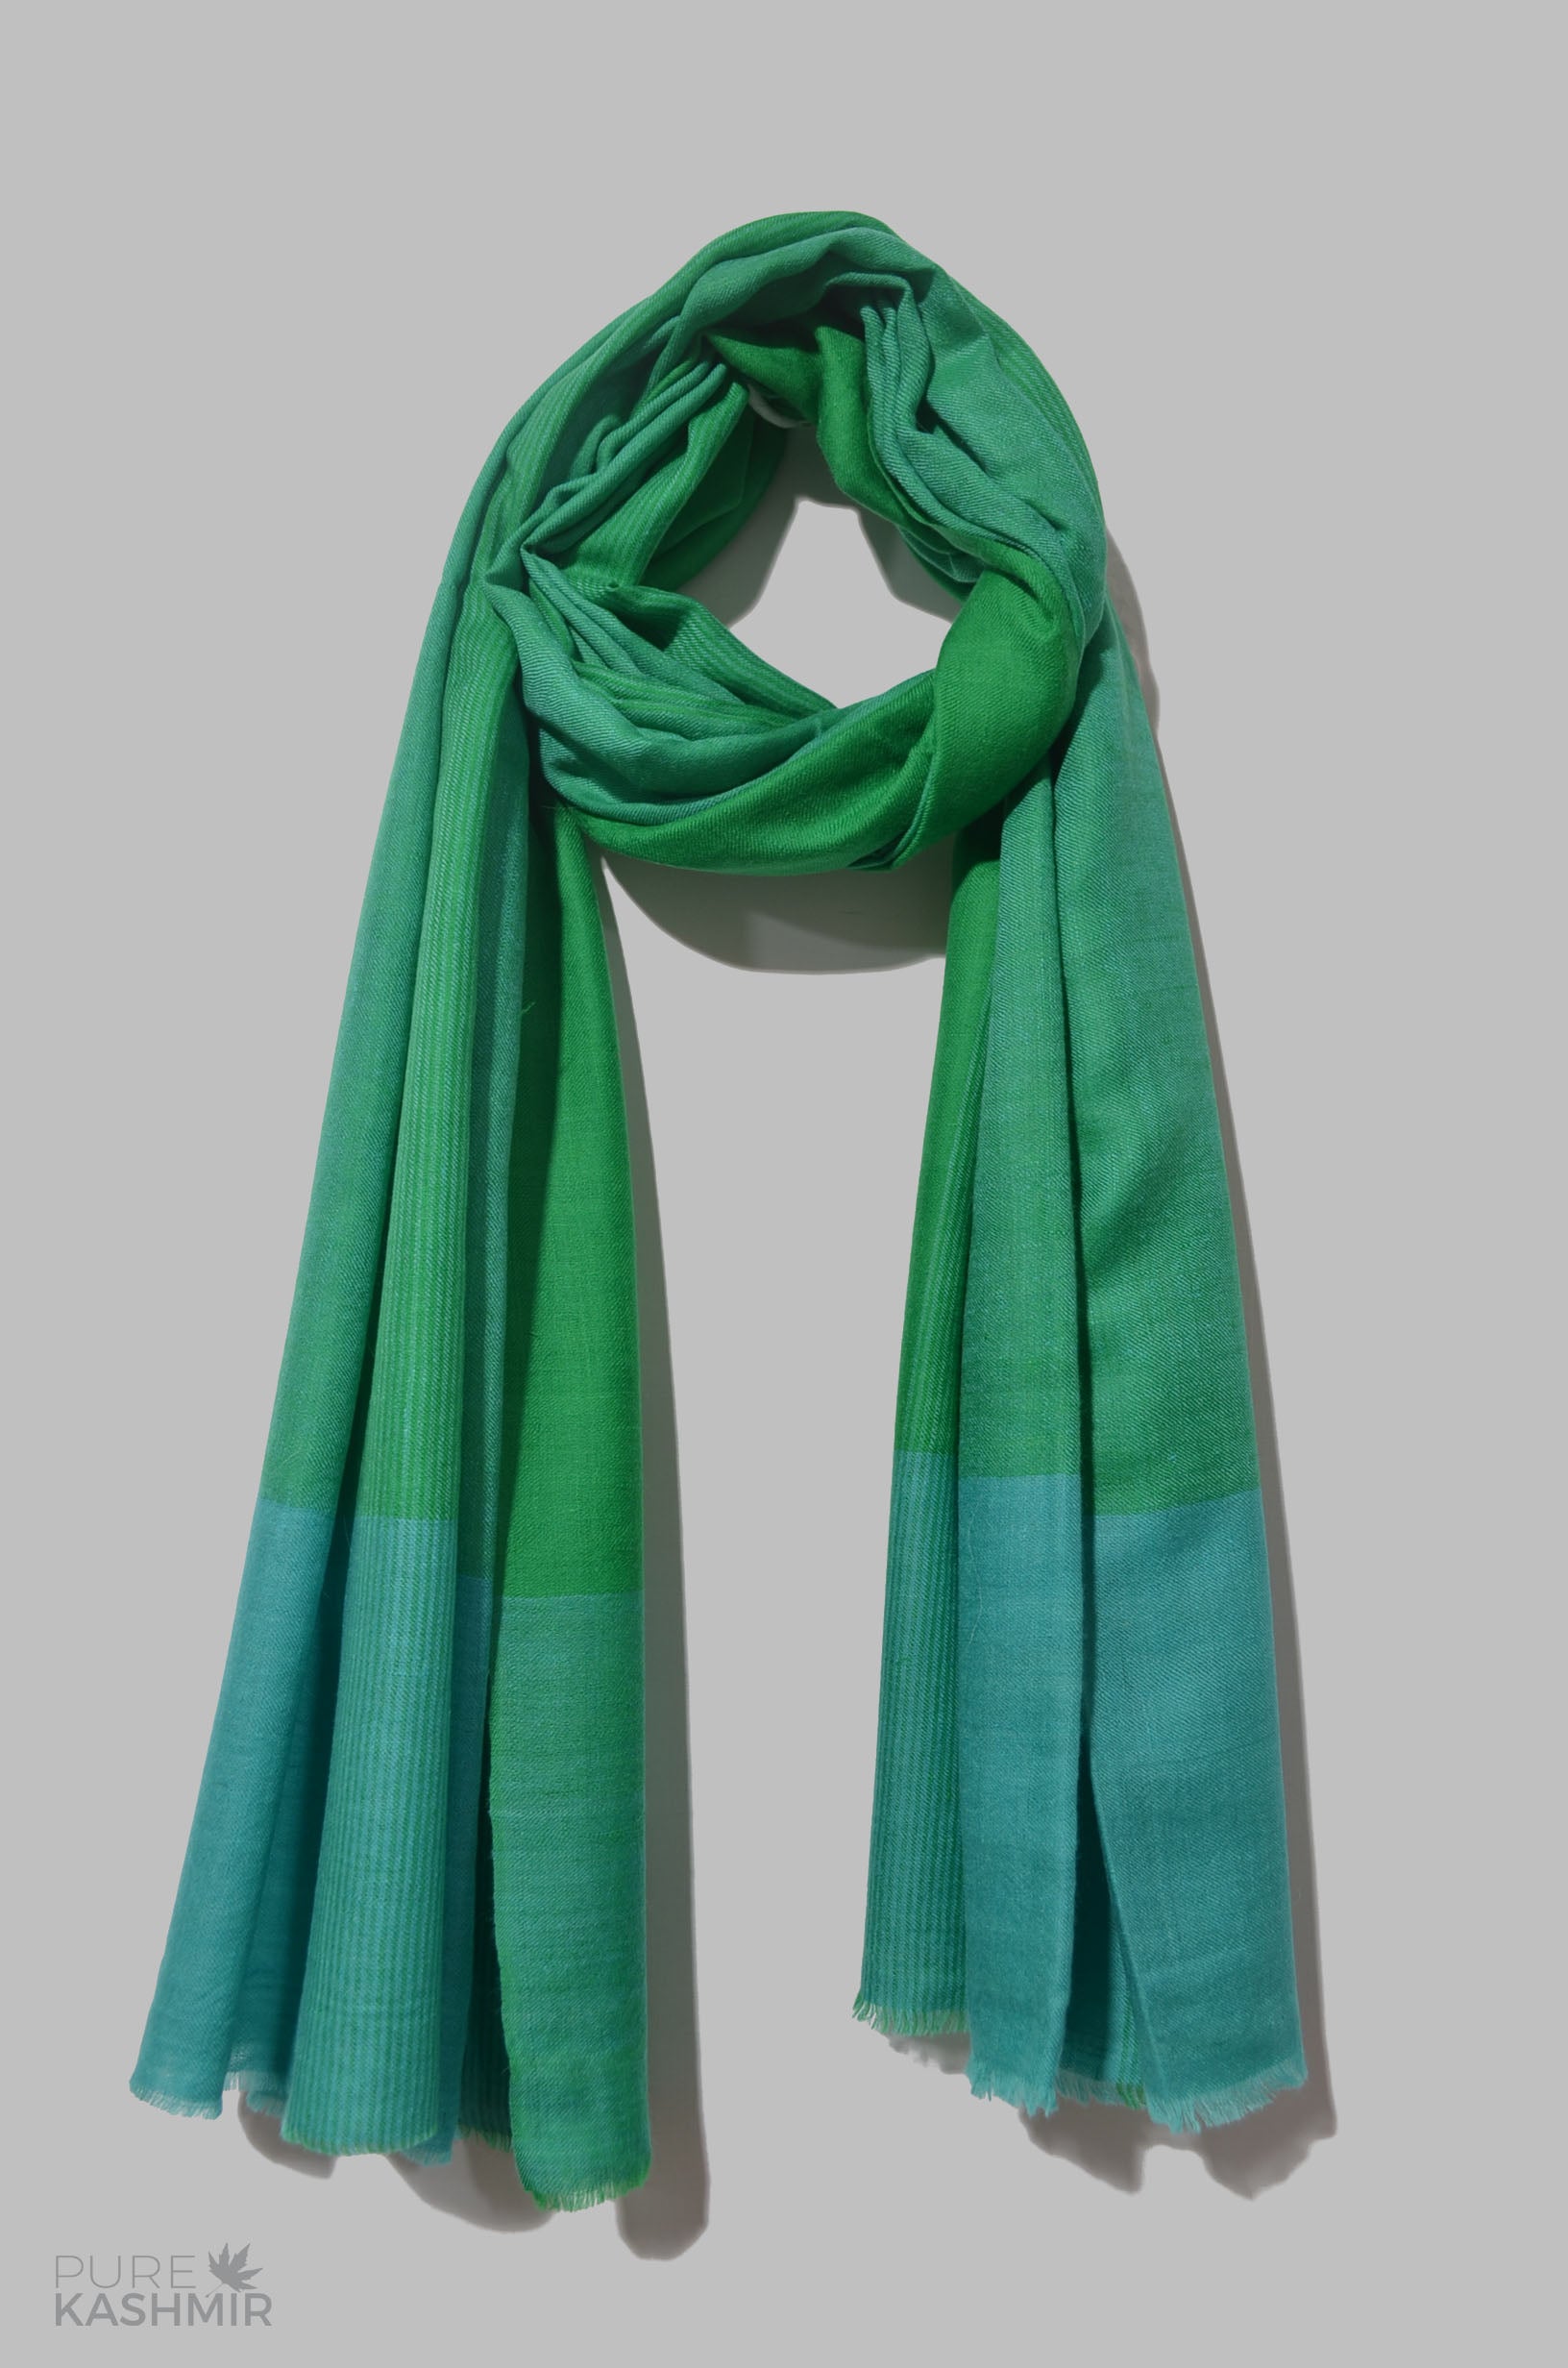 Green and Turquoise Check Cashmere Travel Wrap